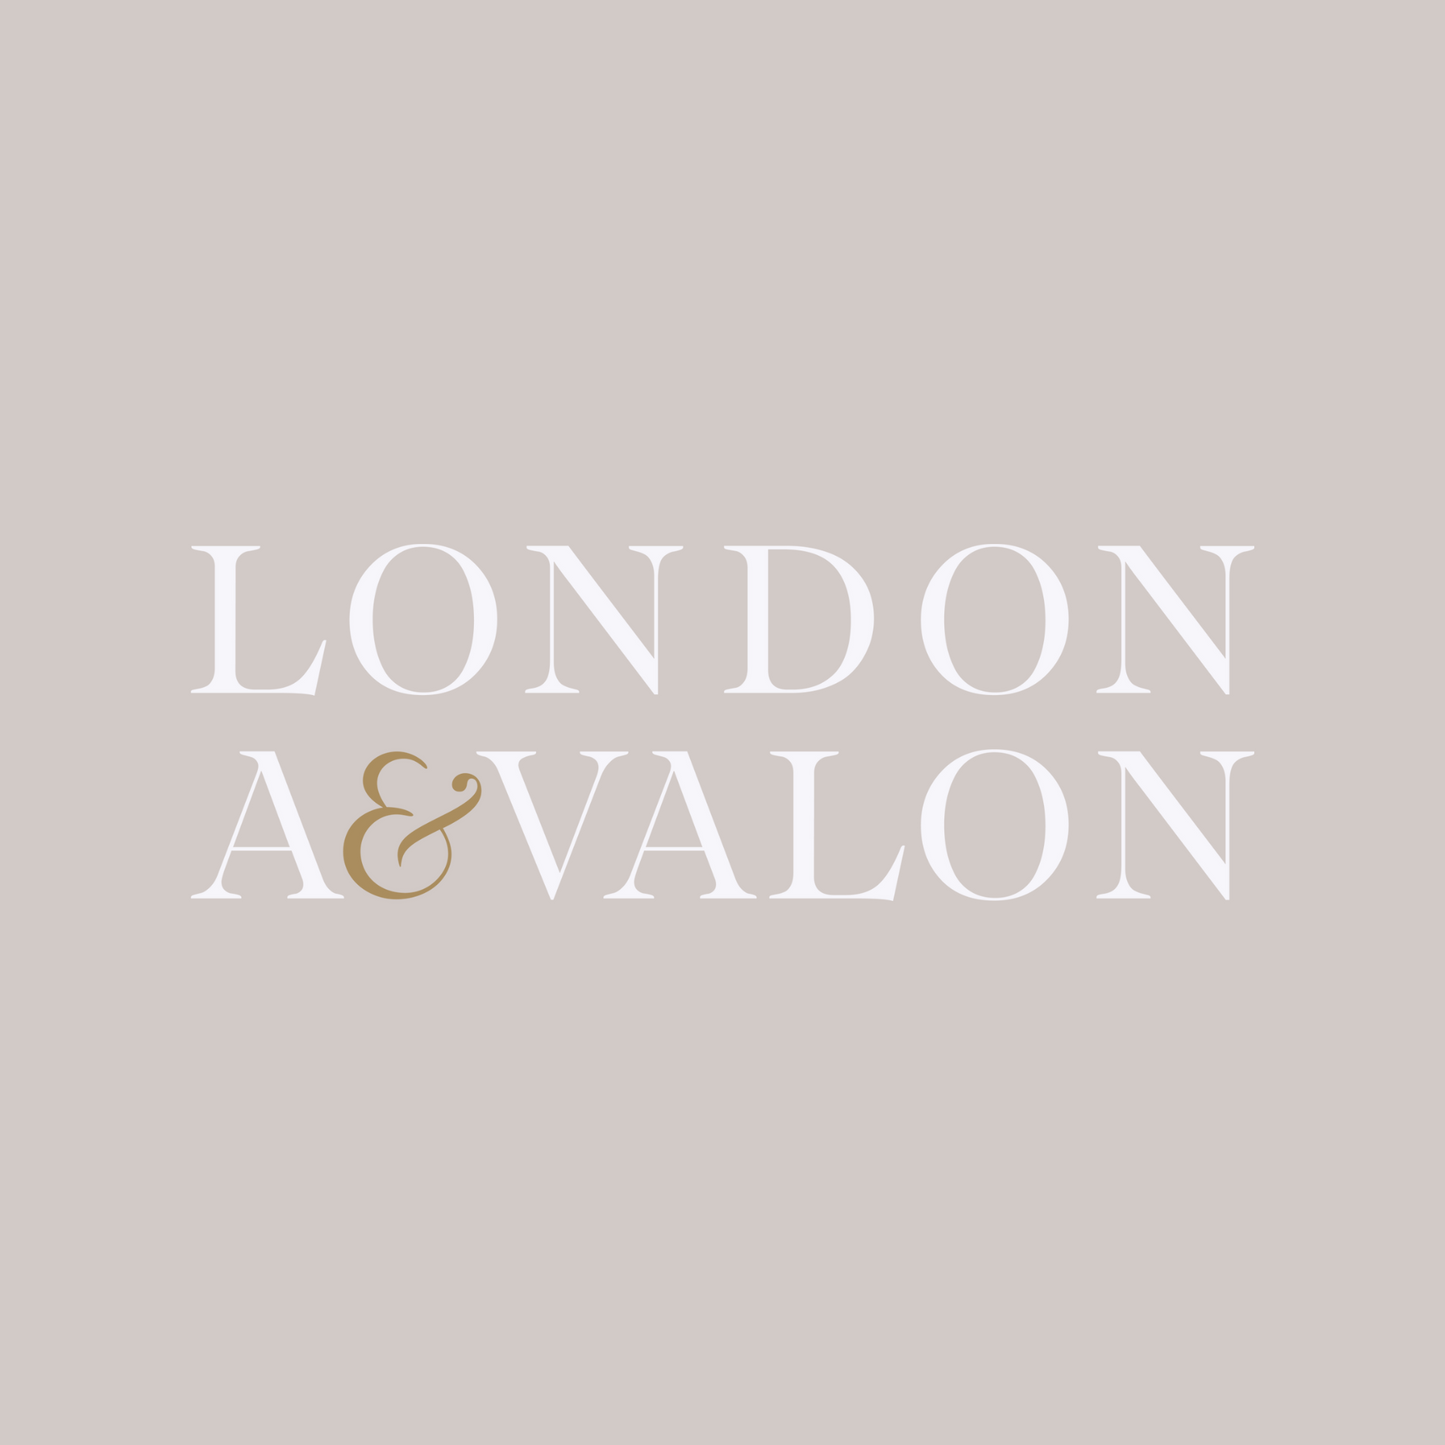 Would you like to add embroidered initials? - London and Avalon